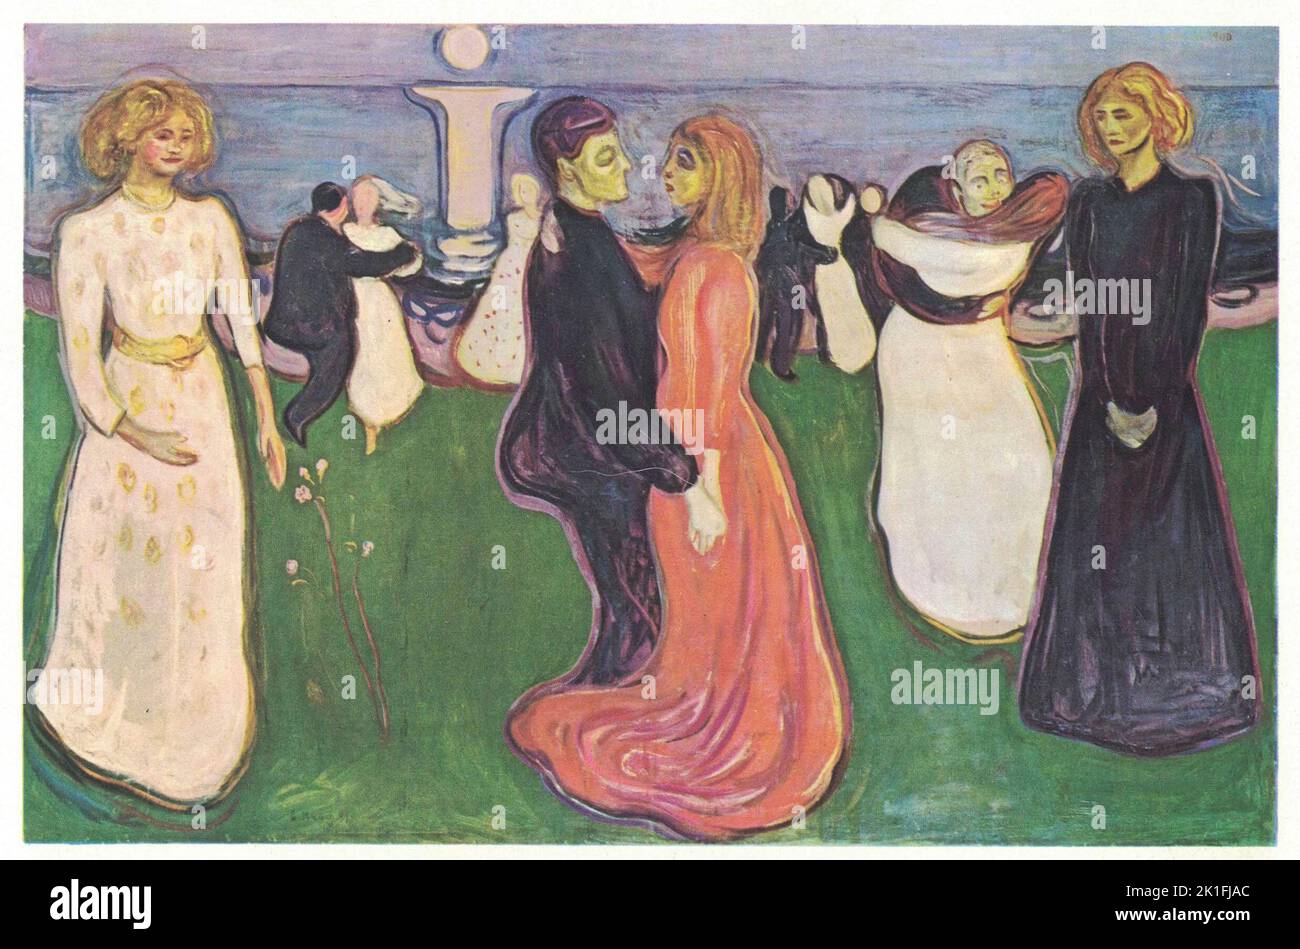 The Dance of Life, 1899 - 1900, oil canvas. Painting by Edvard Munch Edvard Munch; 12 December 1863 – 23 January 1944; was a Norwegian painter. His best known work, The Scream (1893), has become one of Western art's most iconic images. Stock Photo